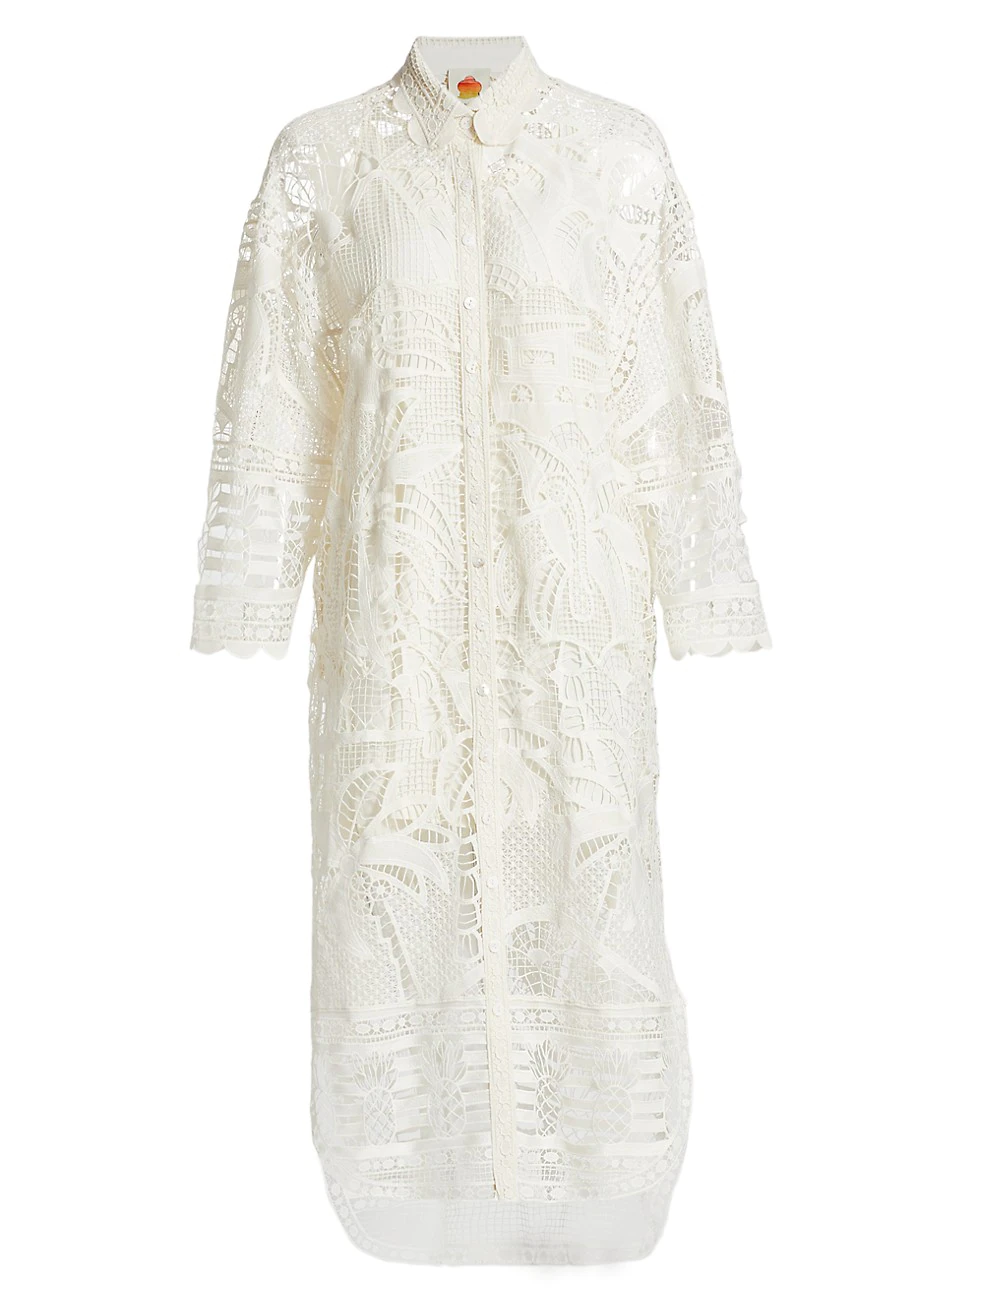 Lace Shirtdress from Farm Rio - Saks Fifth Avenue